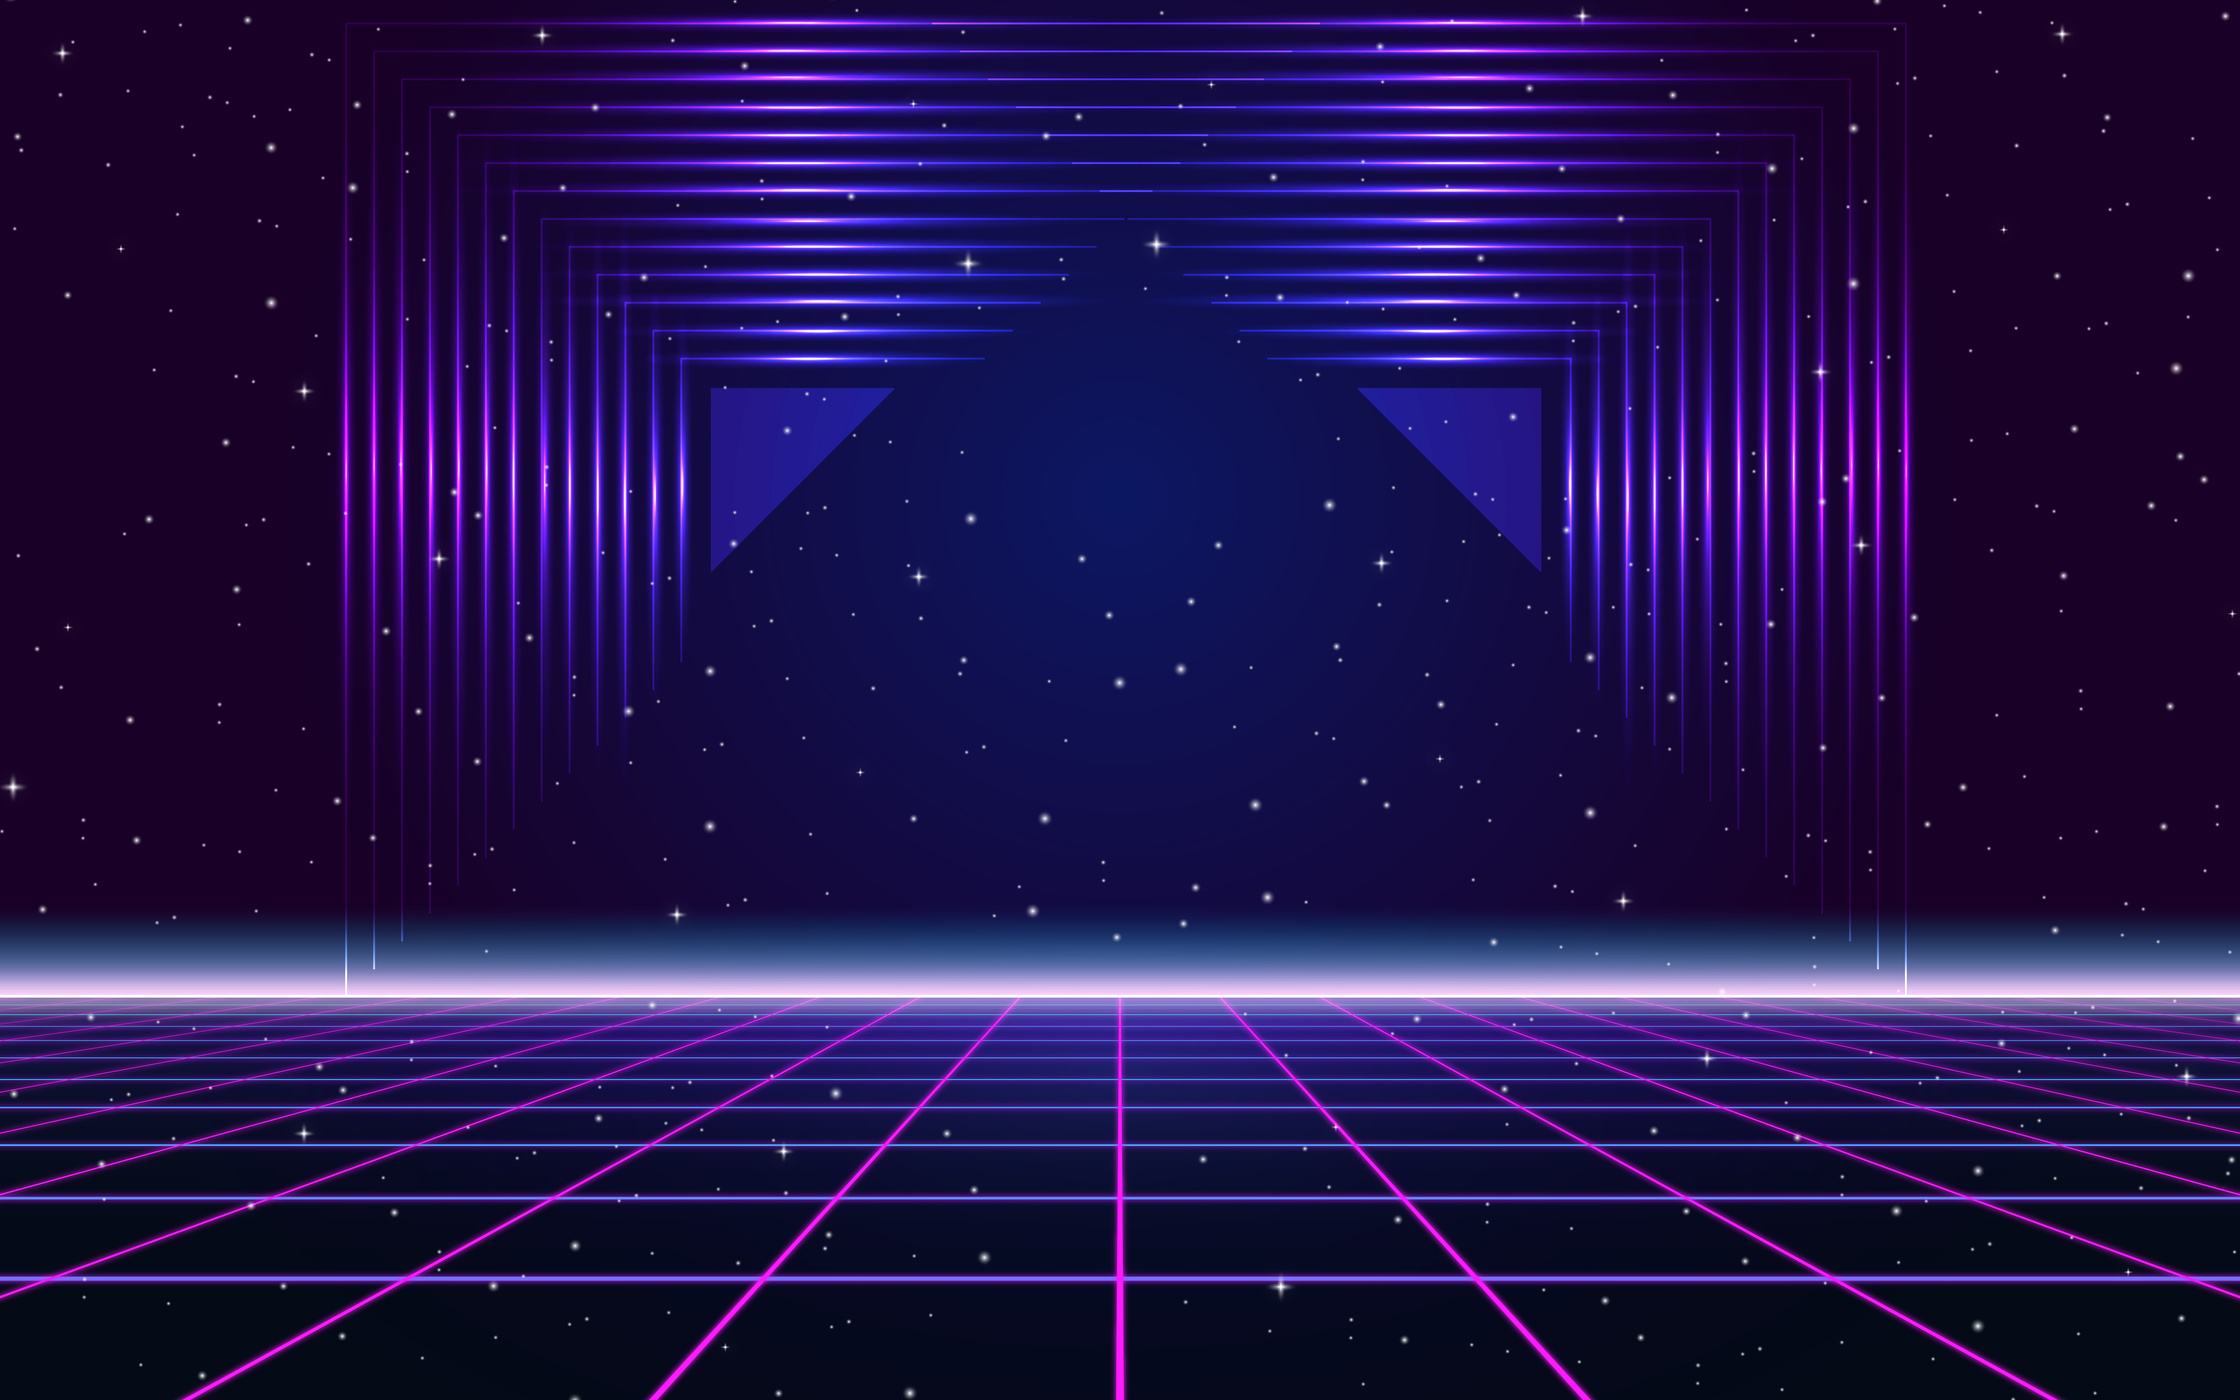 Abstract retro style 80s-90s Sci-Fi background. Laser neon shapes on futuristic grid landscape.